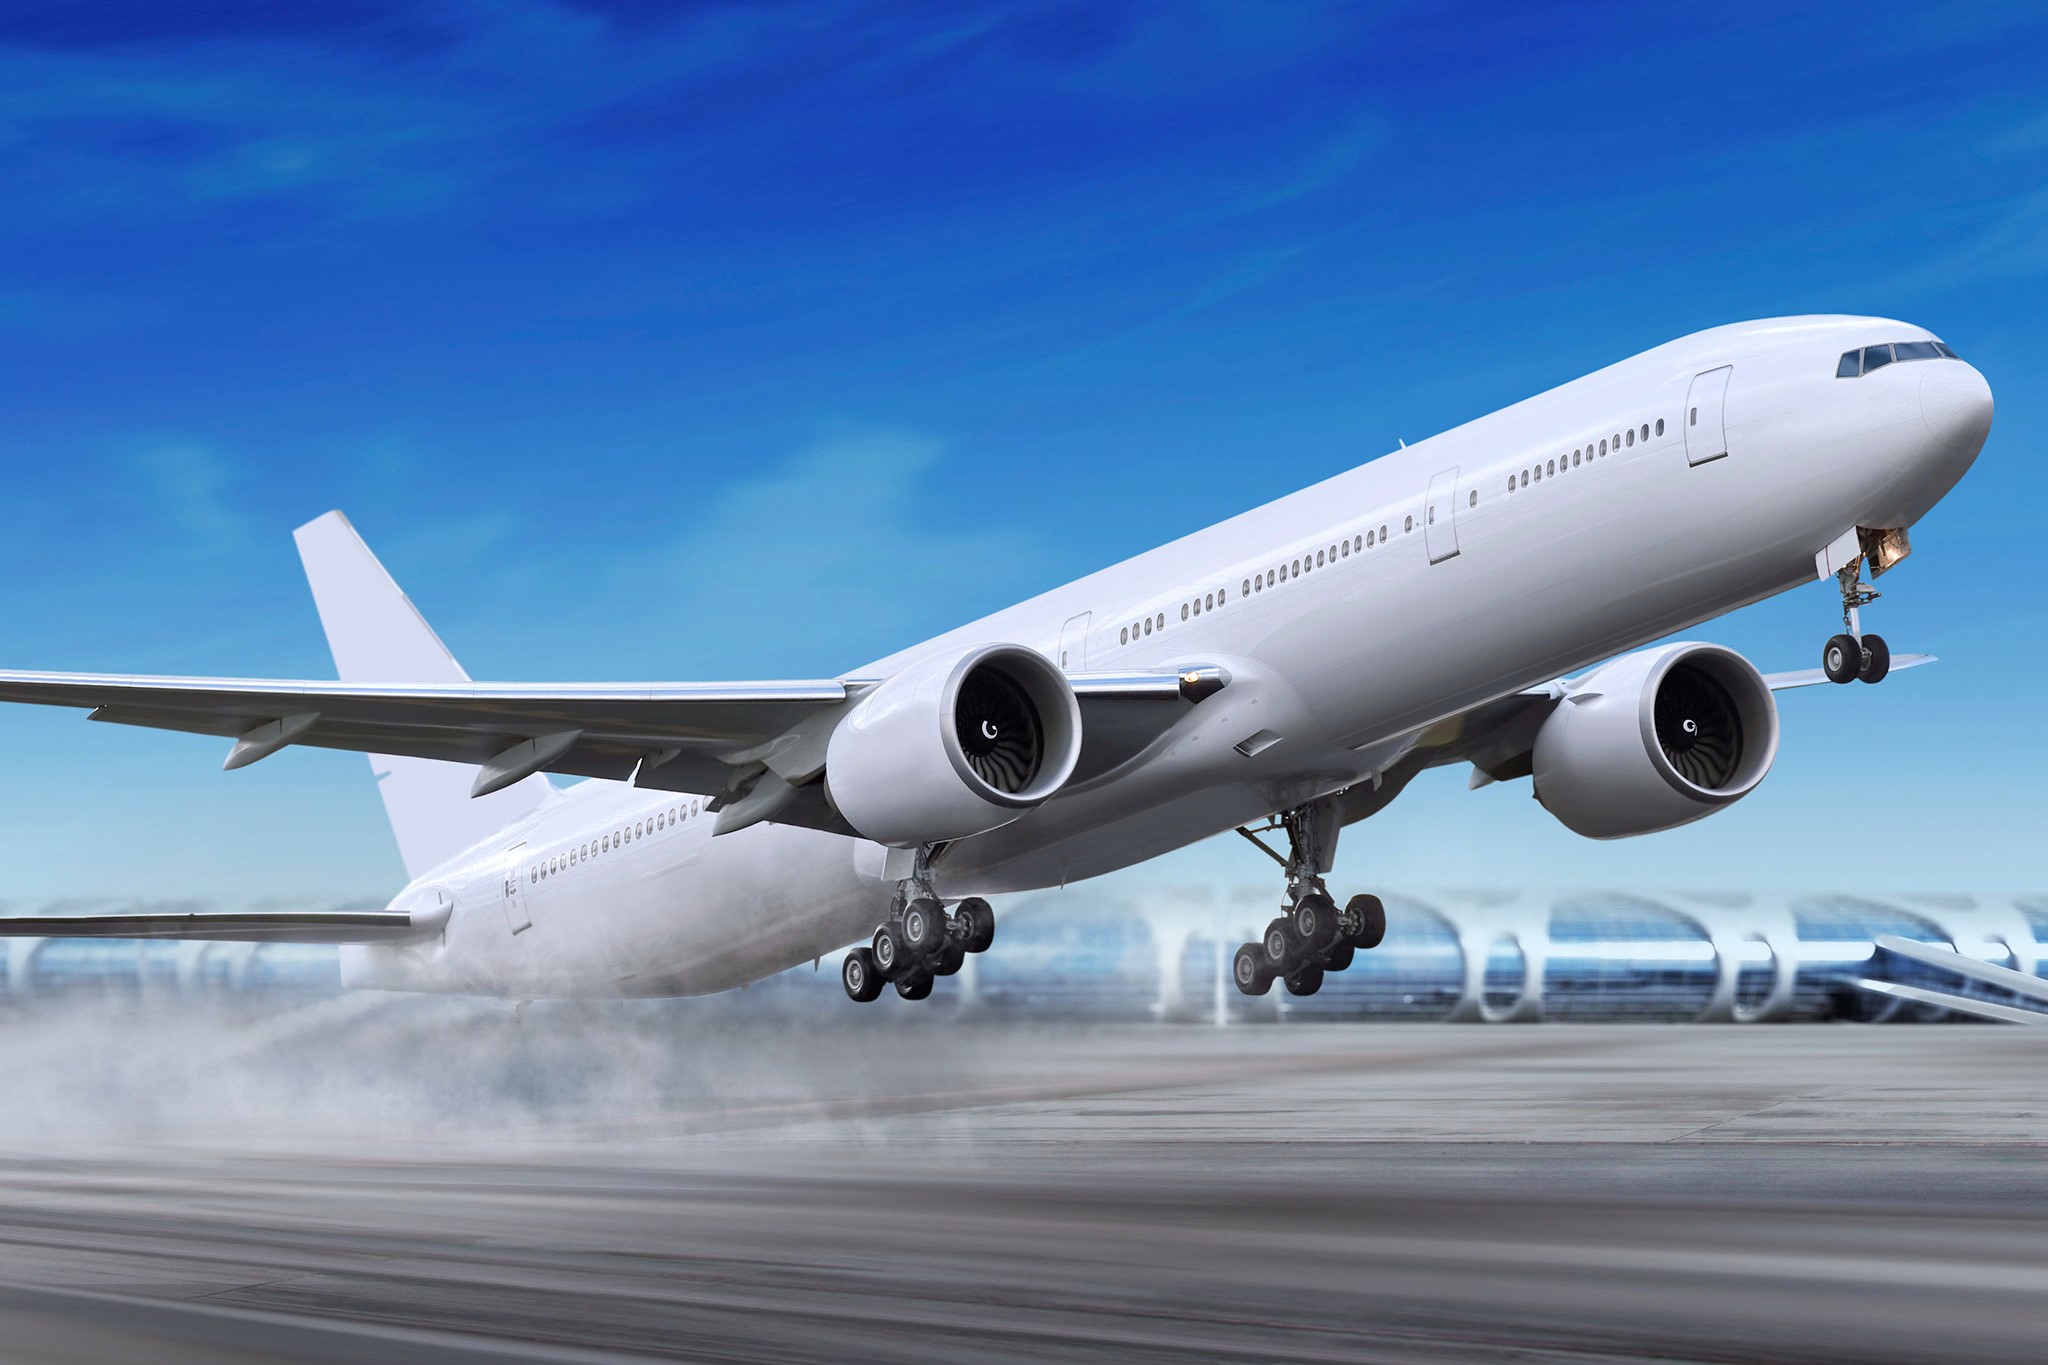 The Surprising Speed At Which Planes Take Off And Accelerate On The Runway